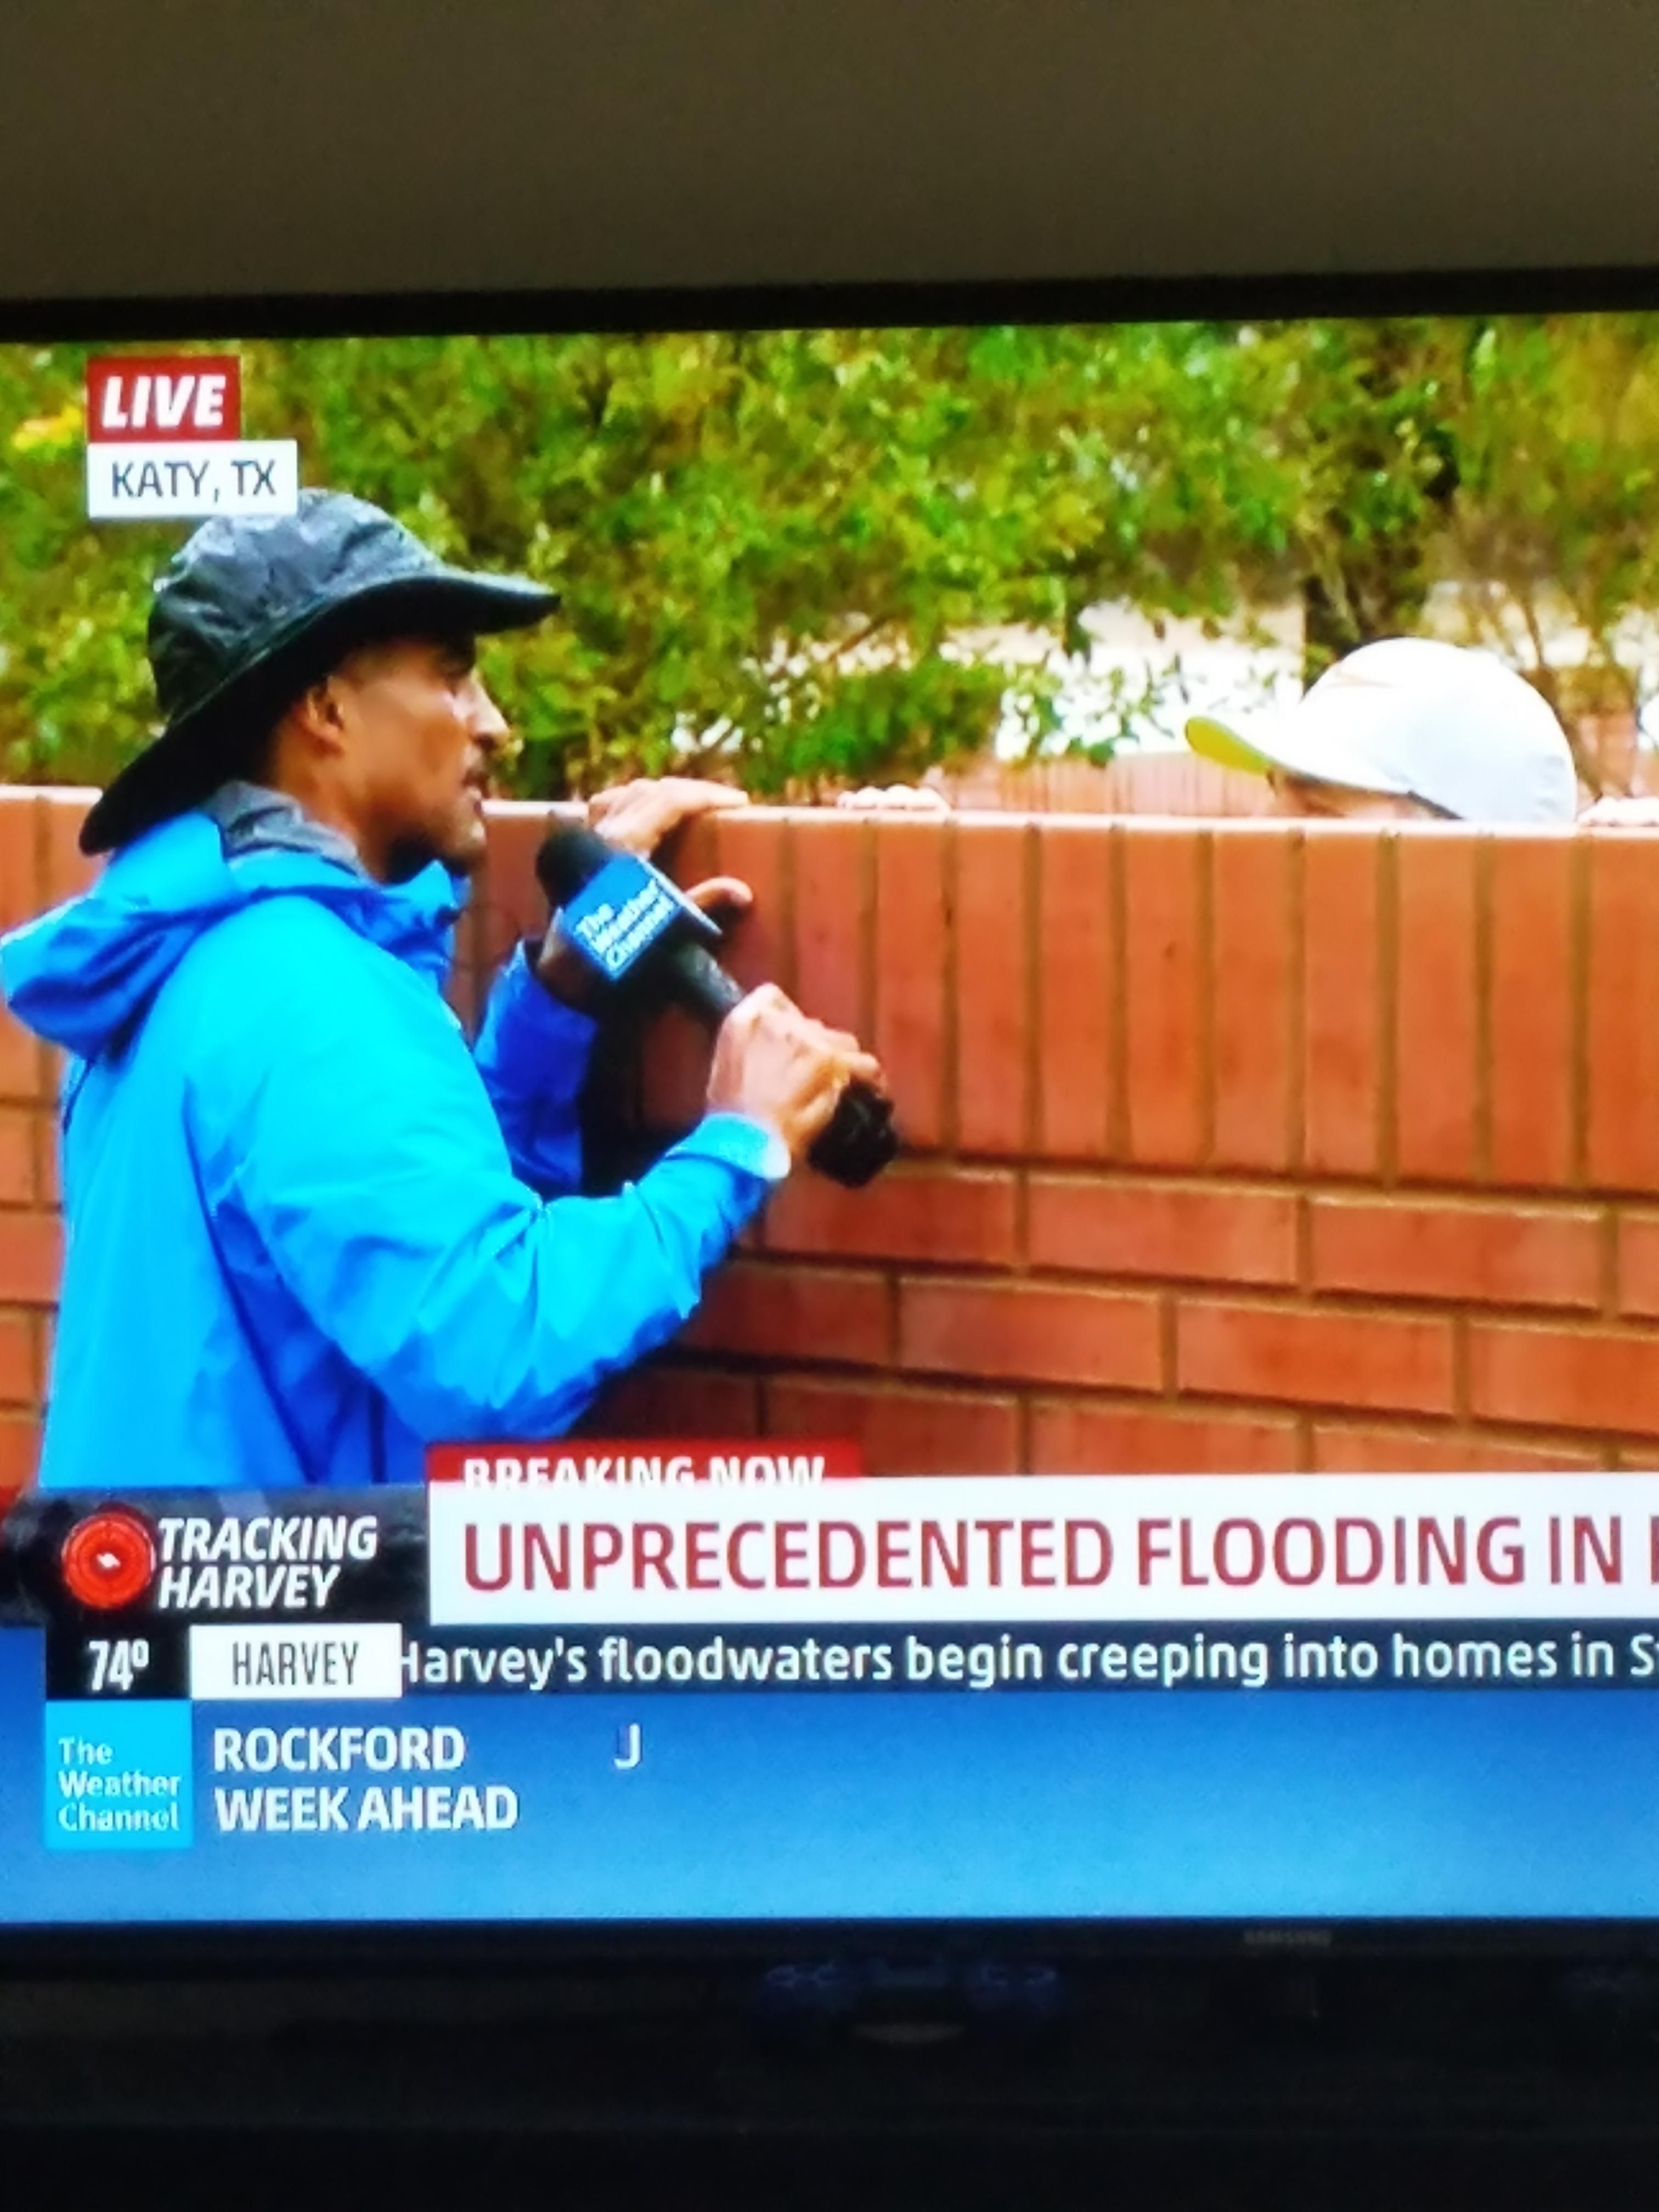 The weather channel was interviewing Wilson from home and improvement.